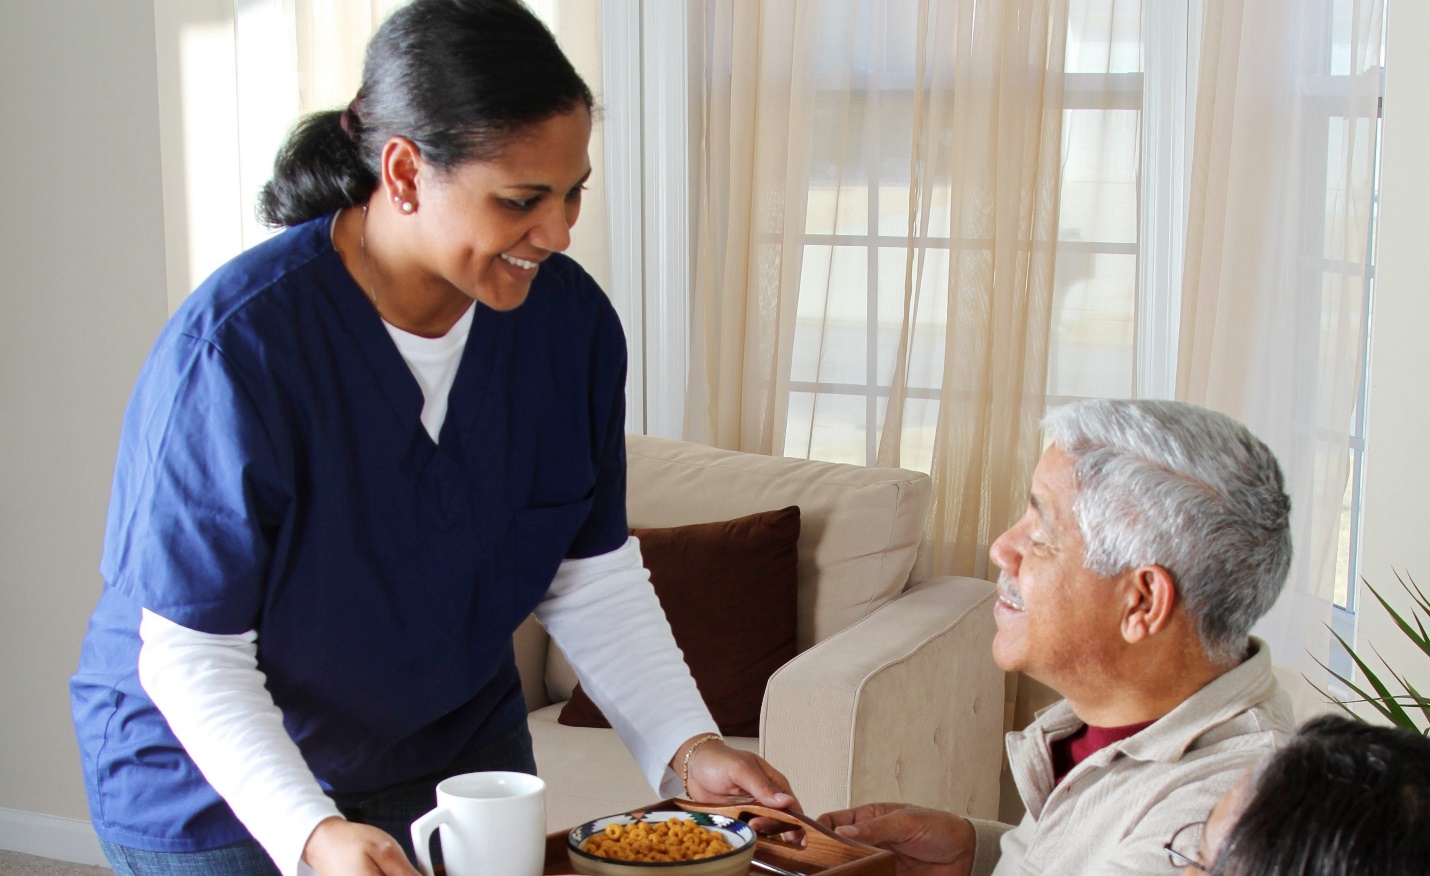 assisted living and Hospice caregivers can be some of the best in the business